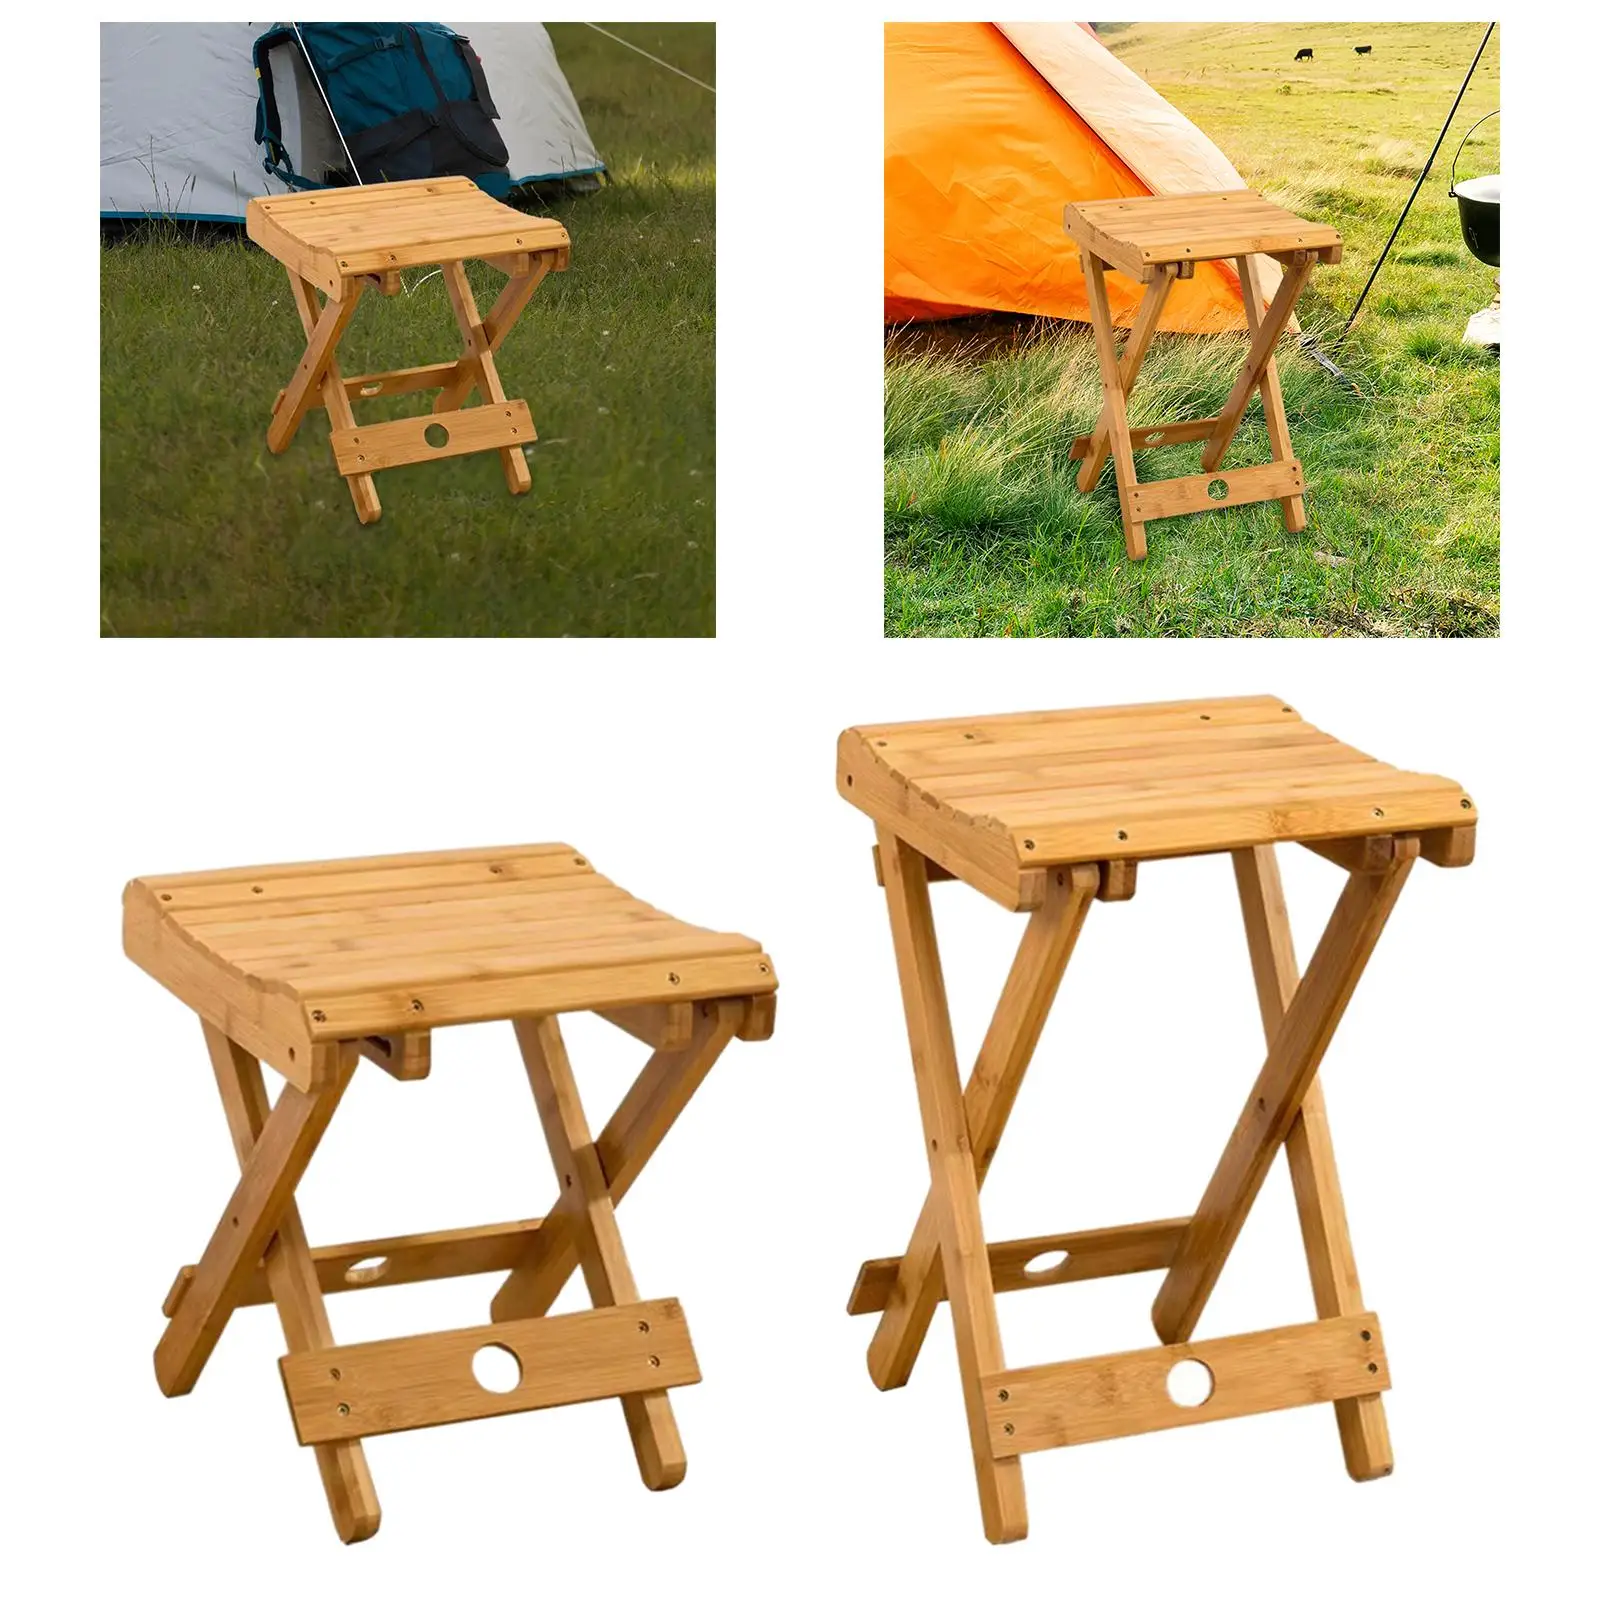 Bamboo Folding Stool Ultralight Furniture Collapsible Outside Fishing Chair Foldable Stool for Travel Picnic BBQ Garden Backyard